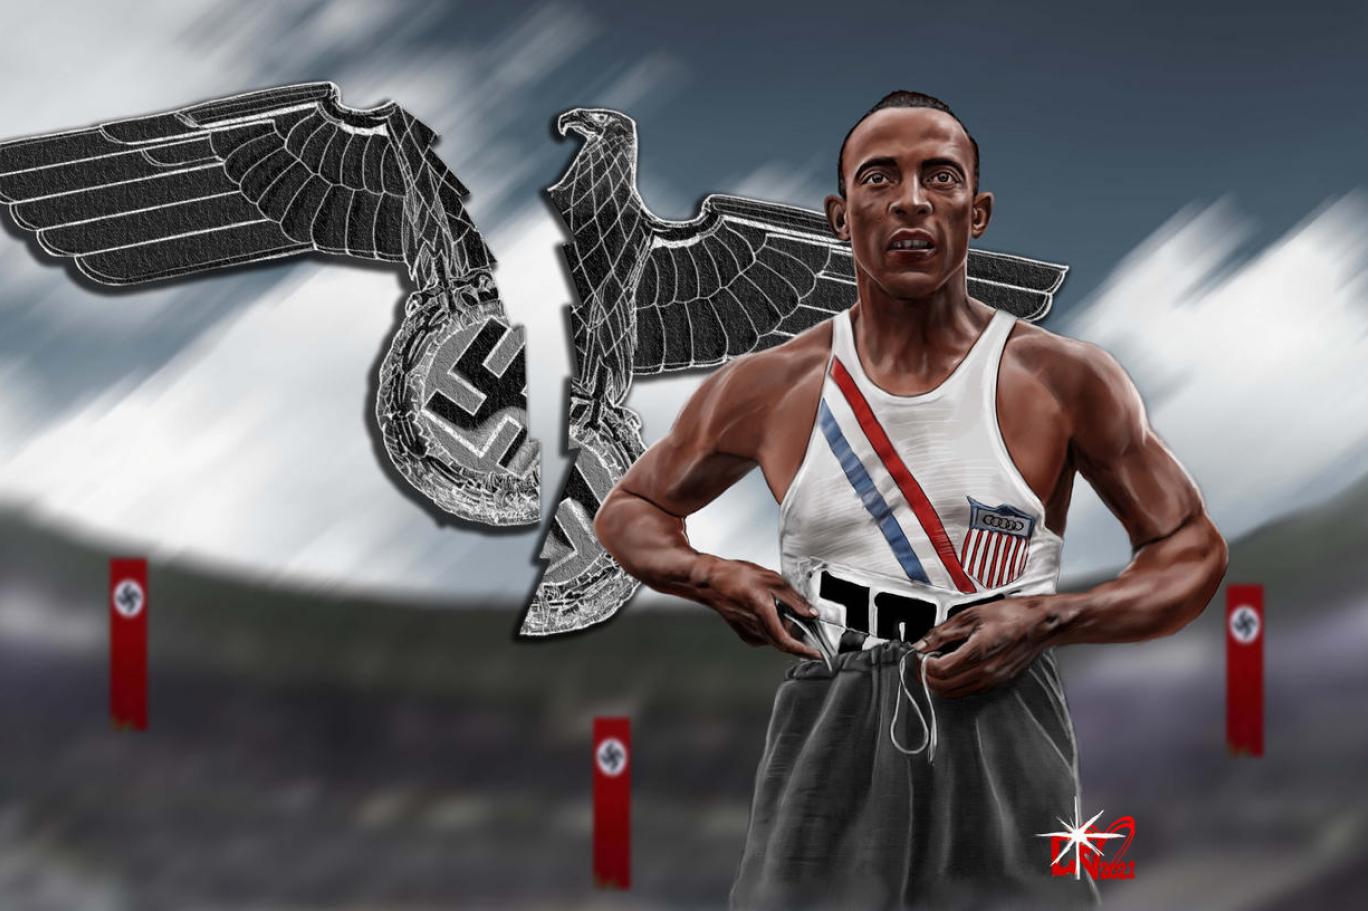 The athlete who caused Hitler to flee the stadium: Who is Jesse Owens?